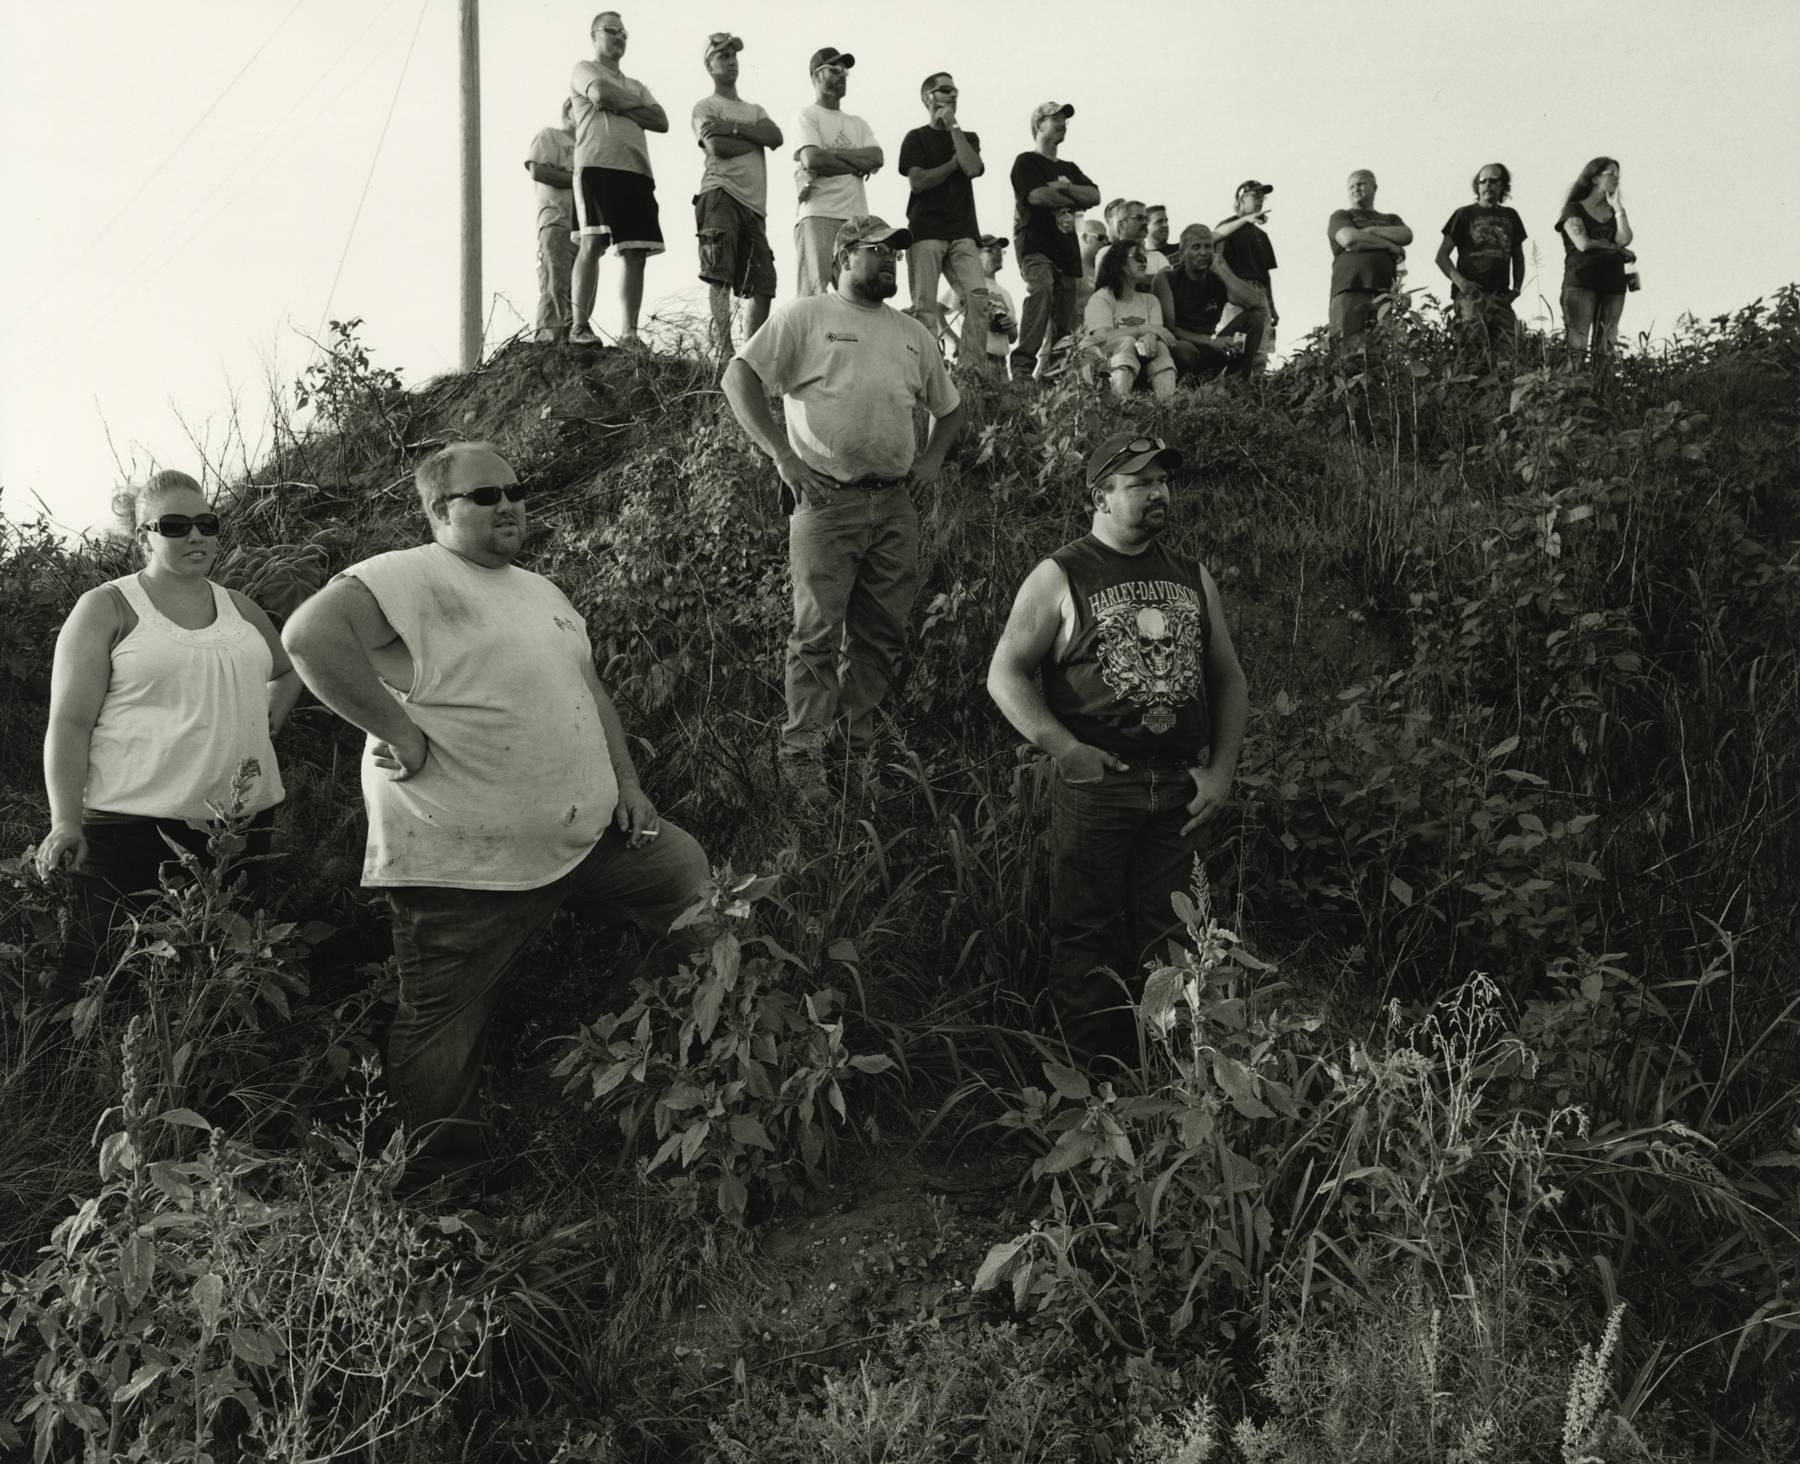 Tom Arndt Black and White Photograph - Fans in the Weeds